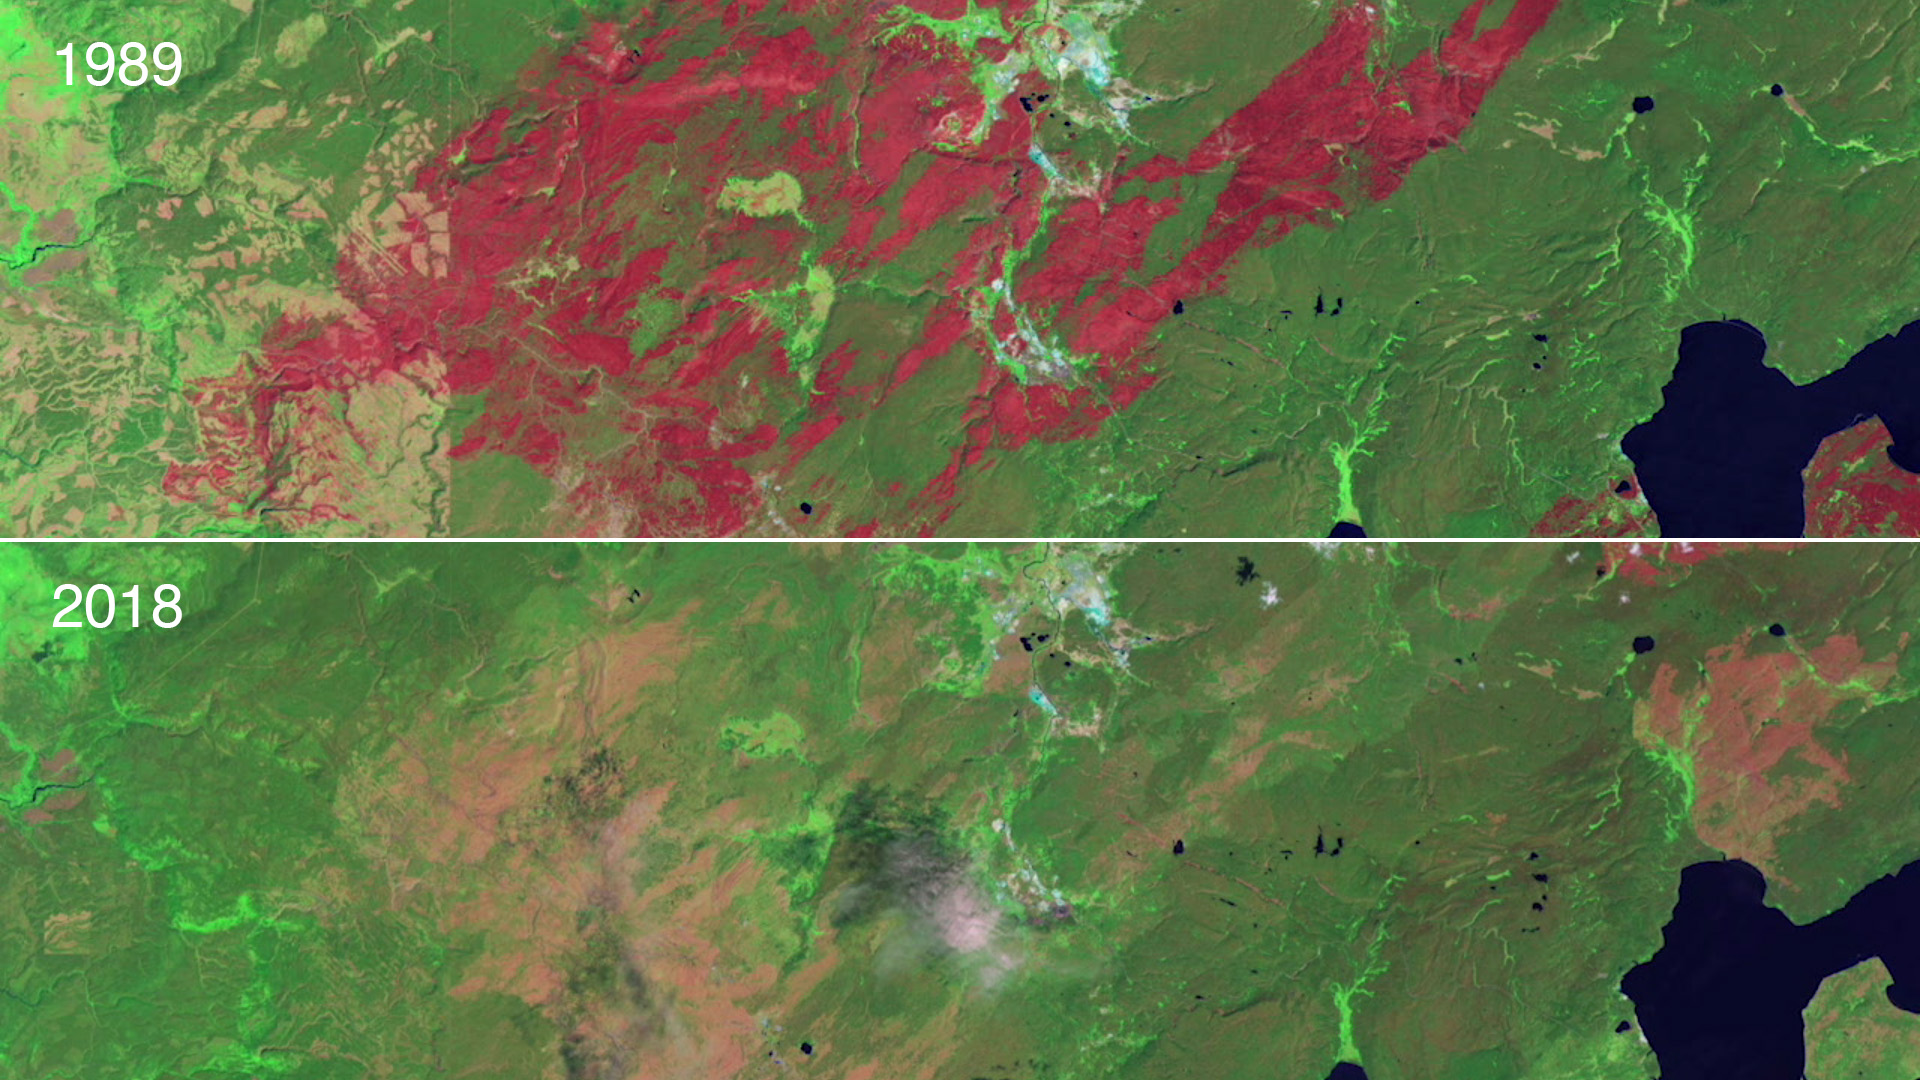 Satellite images reveal a drastic change over the 30 years since the 1988 Yellowstone fires.